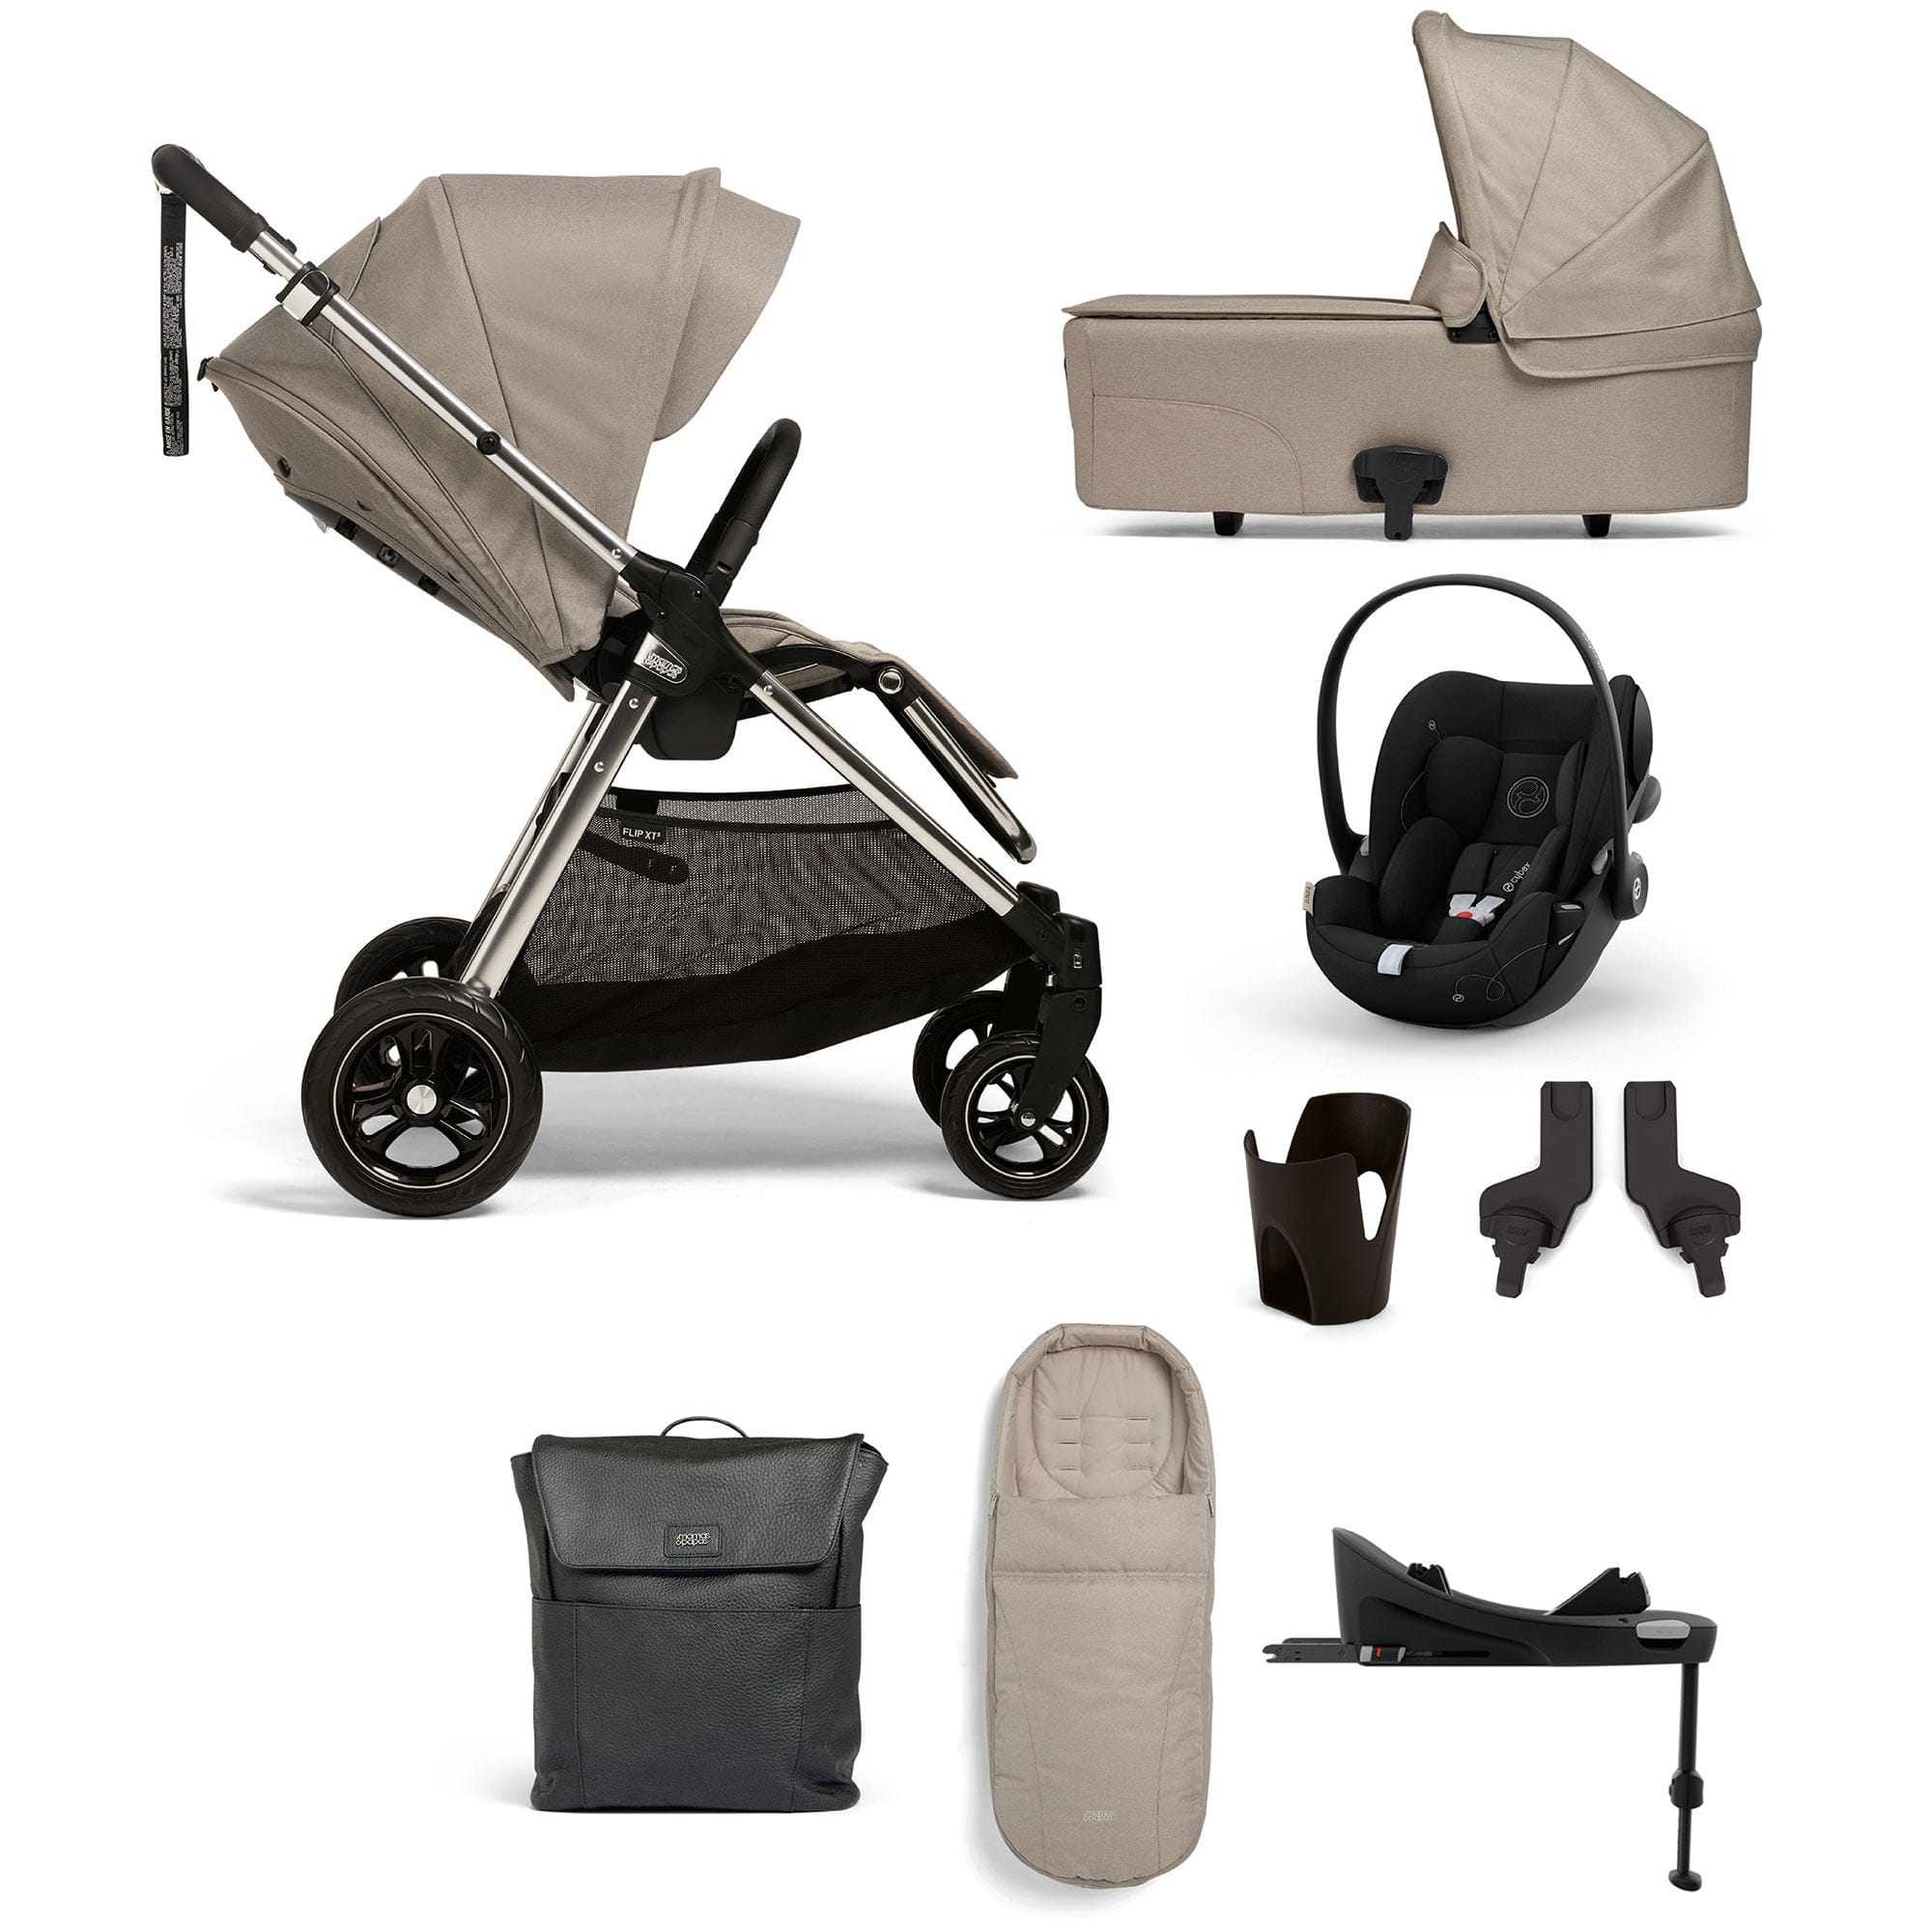 Mamas & Papas Flip XT³ 8 Piece Essentials Bundle with Car Seat in Fawn Travel Systems